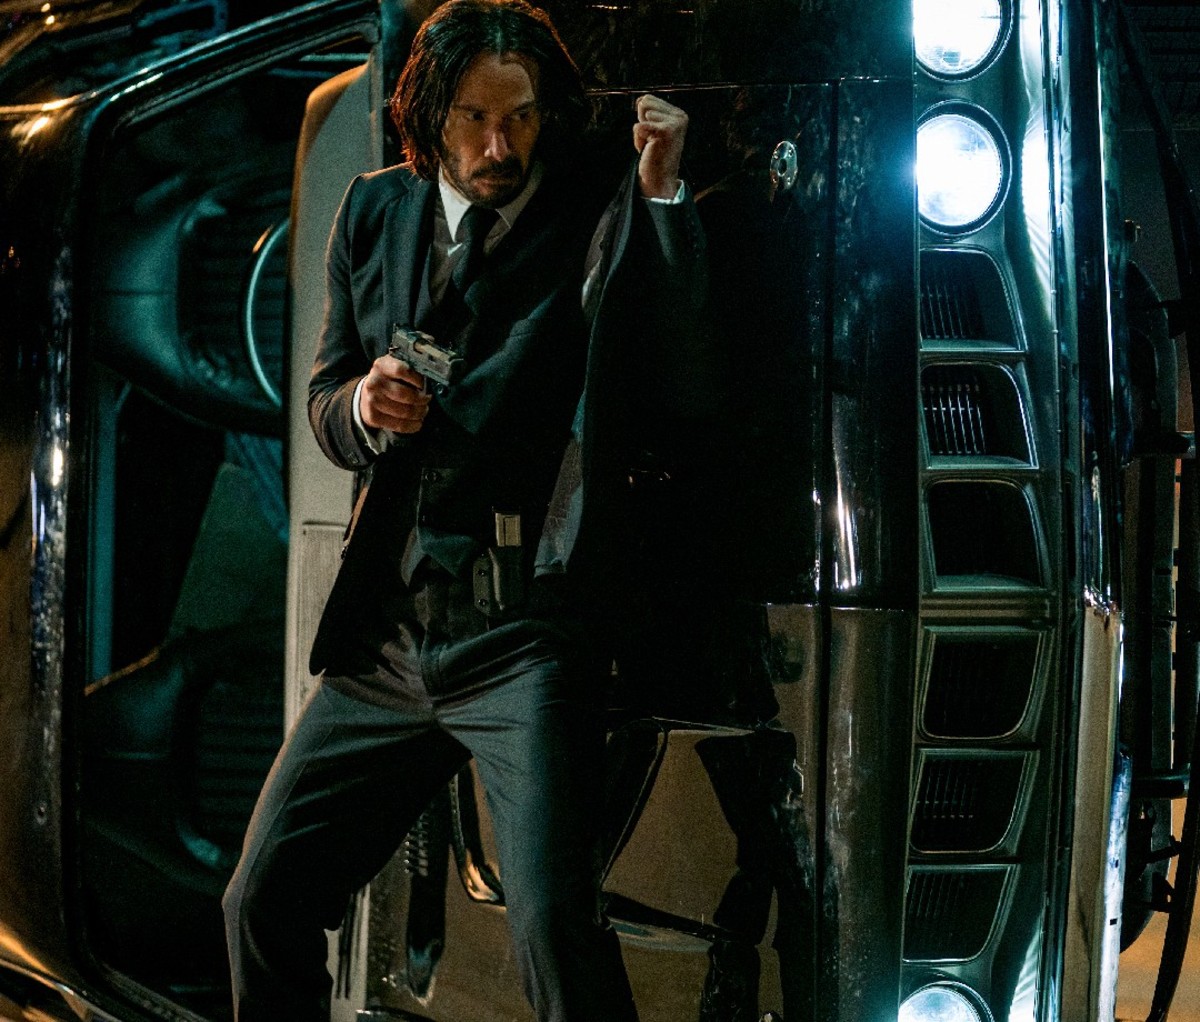 Keanu Reeves takes cover behind a car with gun in hand in a scene from John Wick: Chapter 4